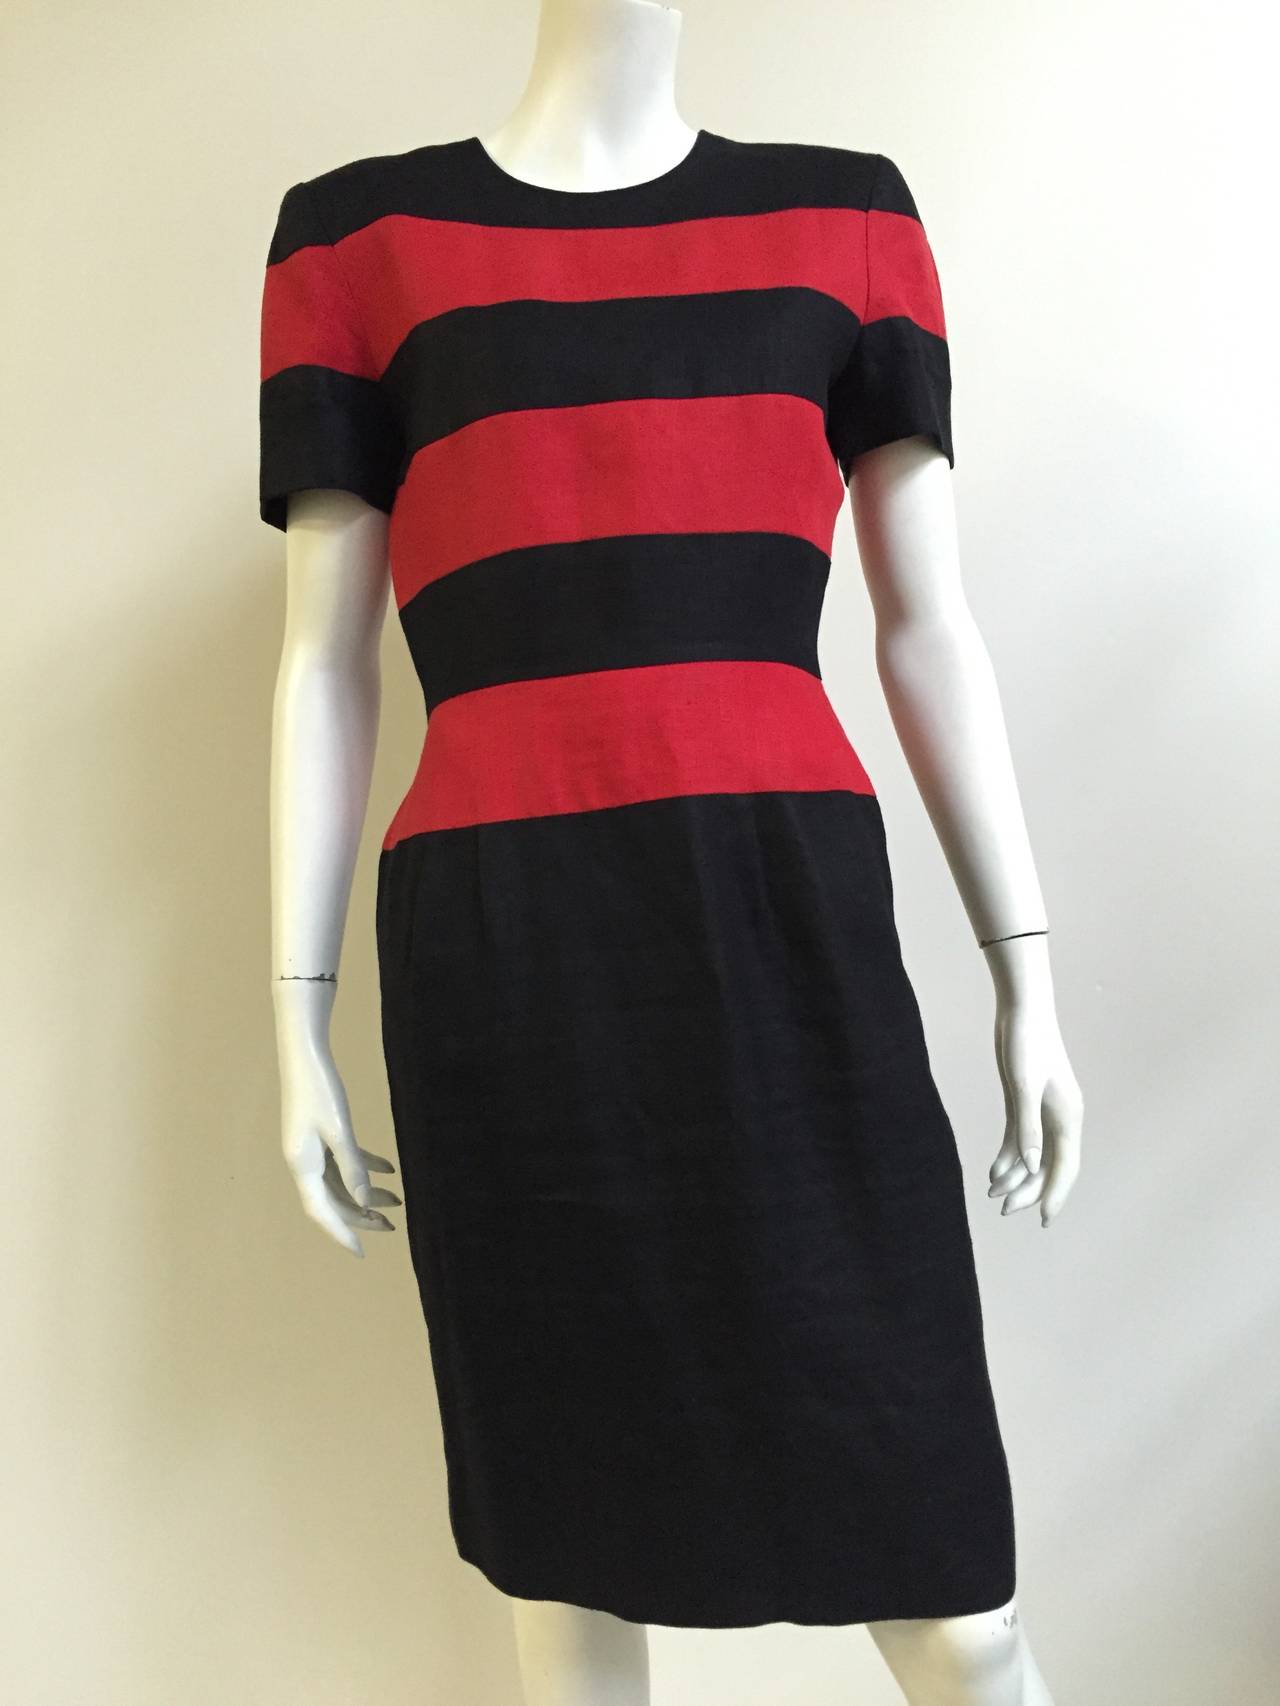 Scaasi Black and Red Linen Striped Sheath Dress, Size 6  im Angebot 4